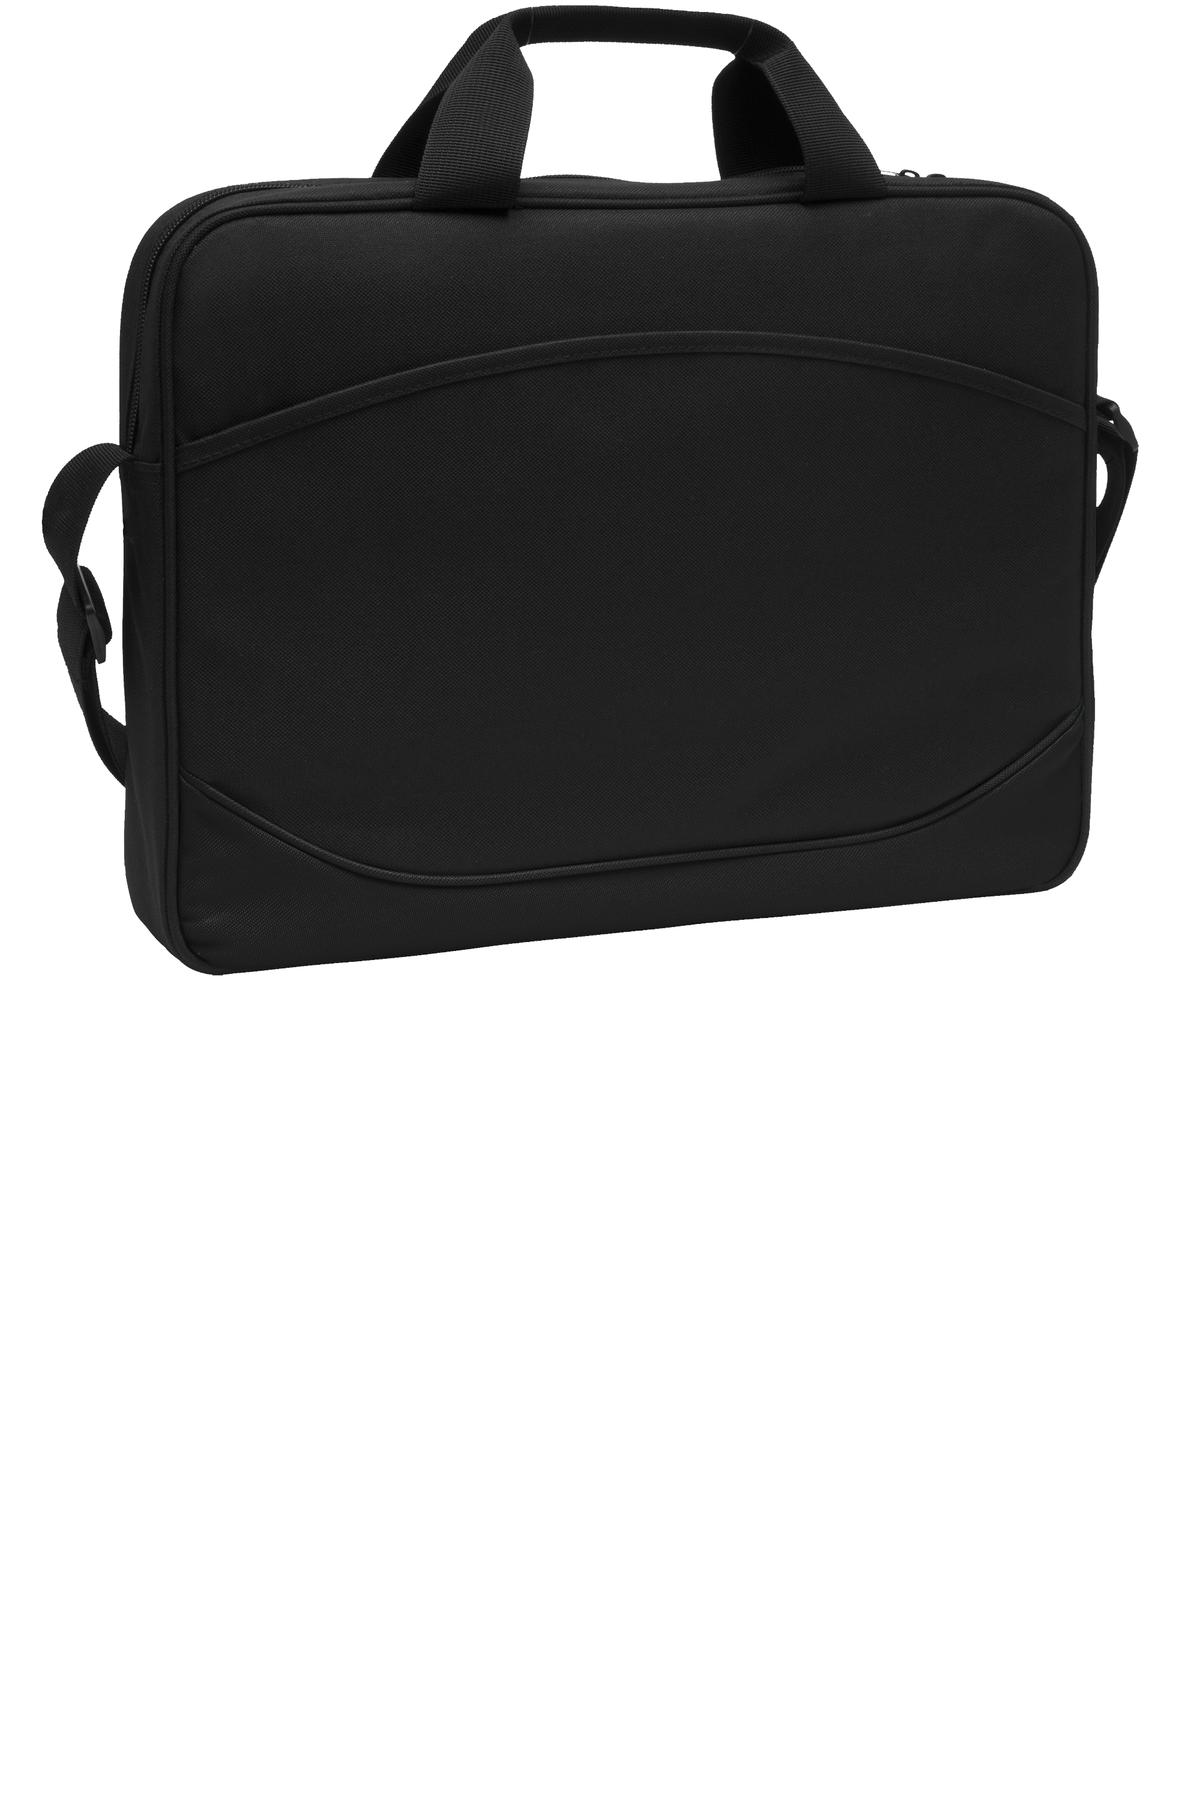 Port Authority Hospitality Bags ® Value Computer Case.-Port Authority